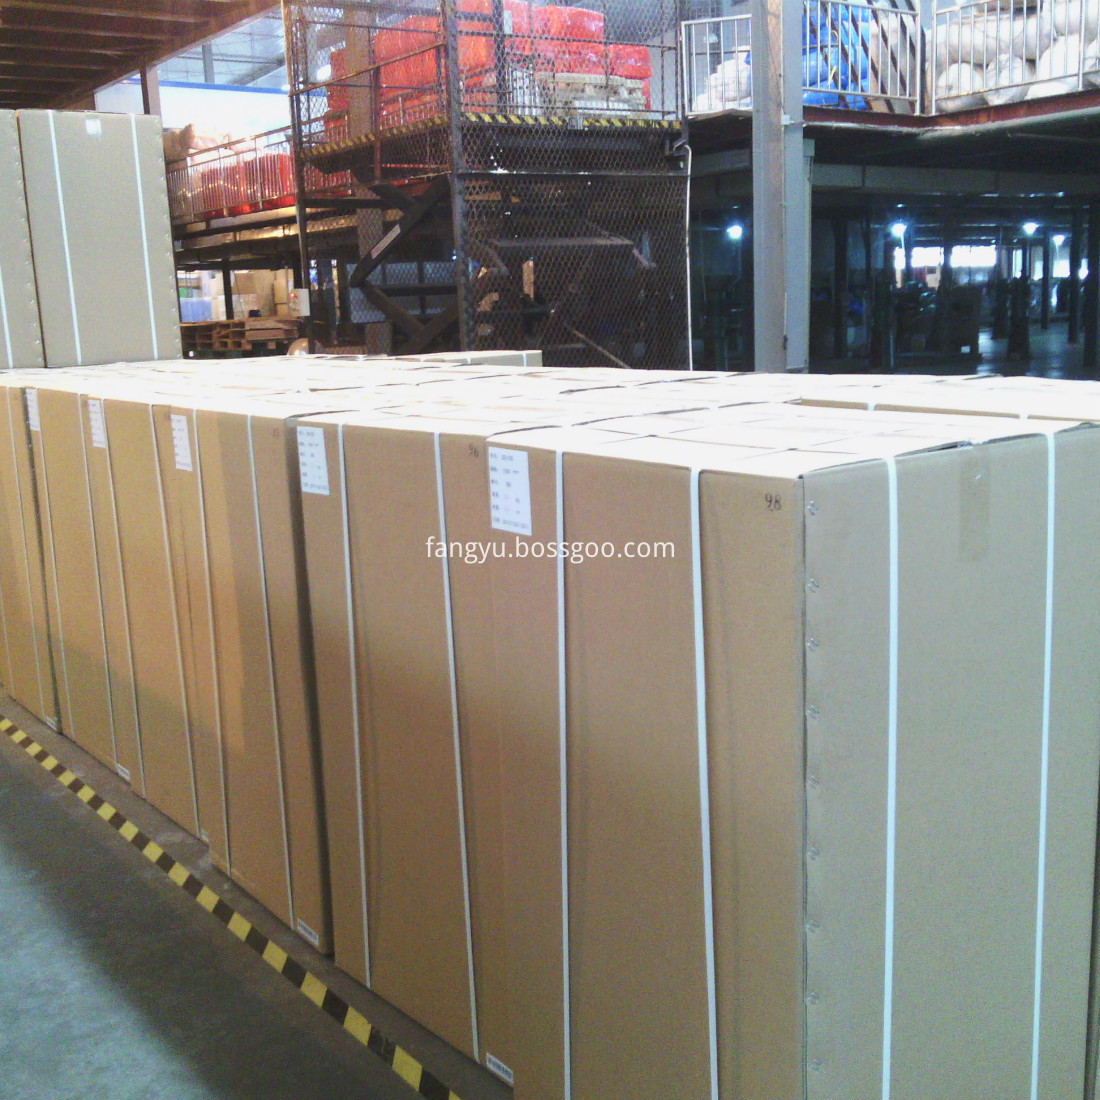 Packing of vacuum insulation panel for refrigerator and cooler box